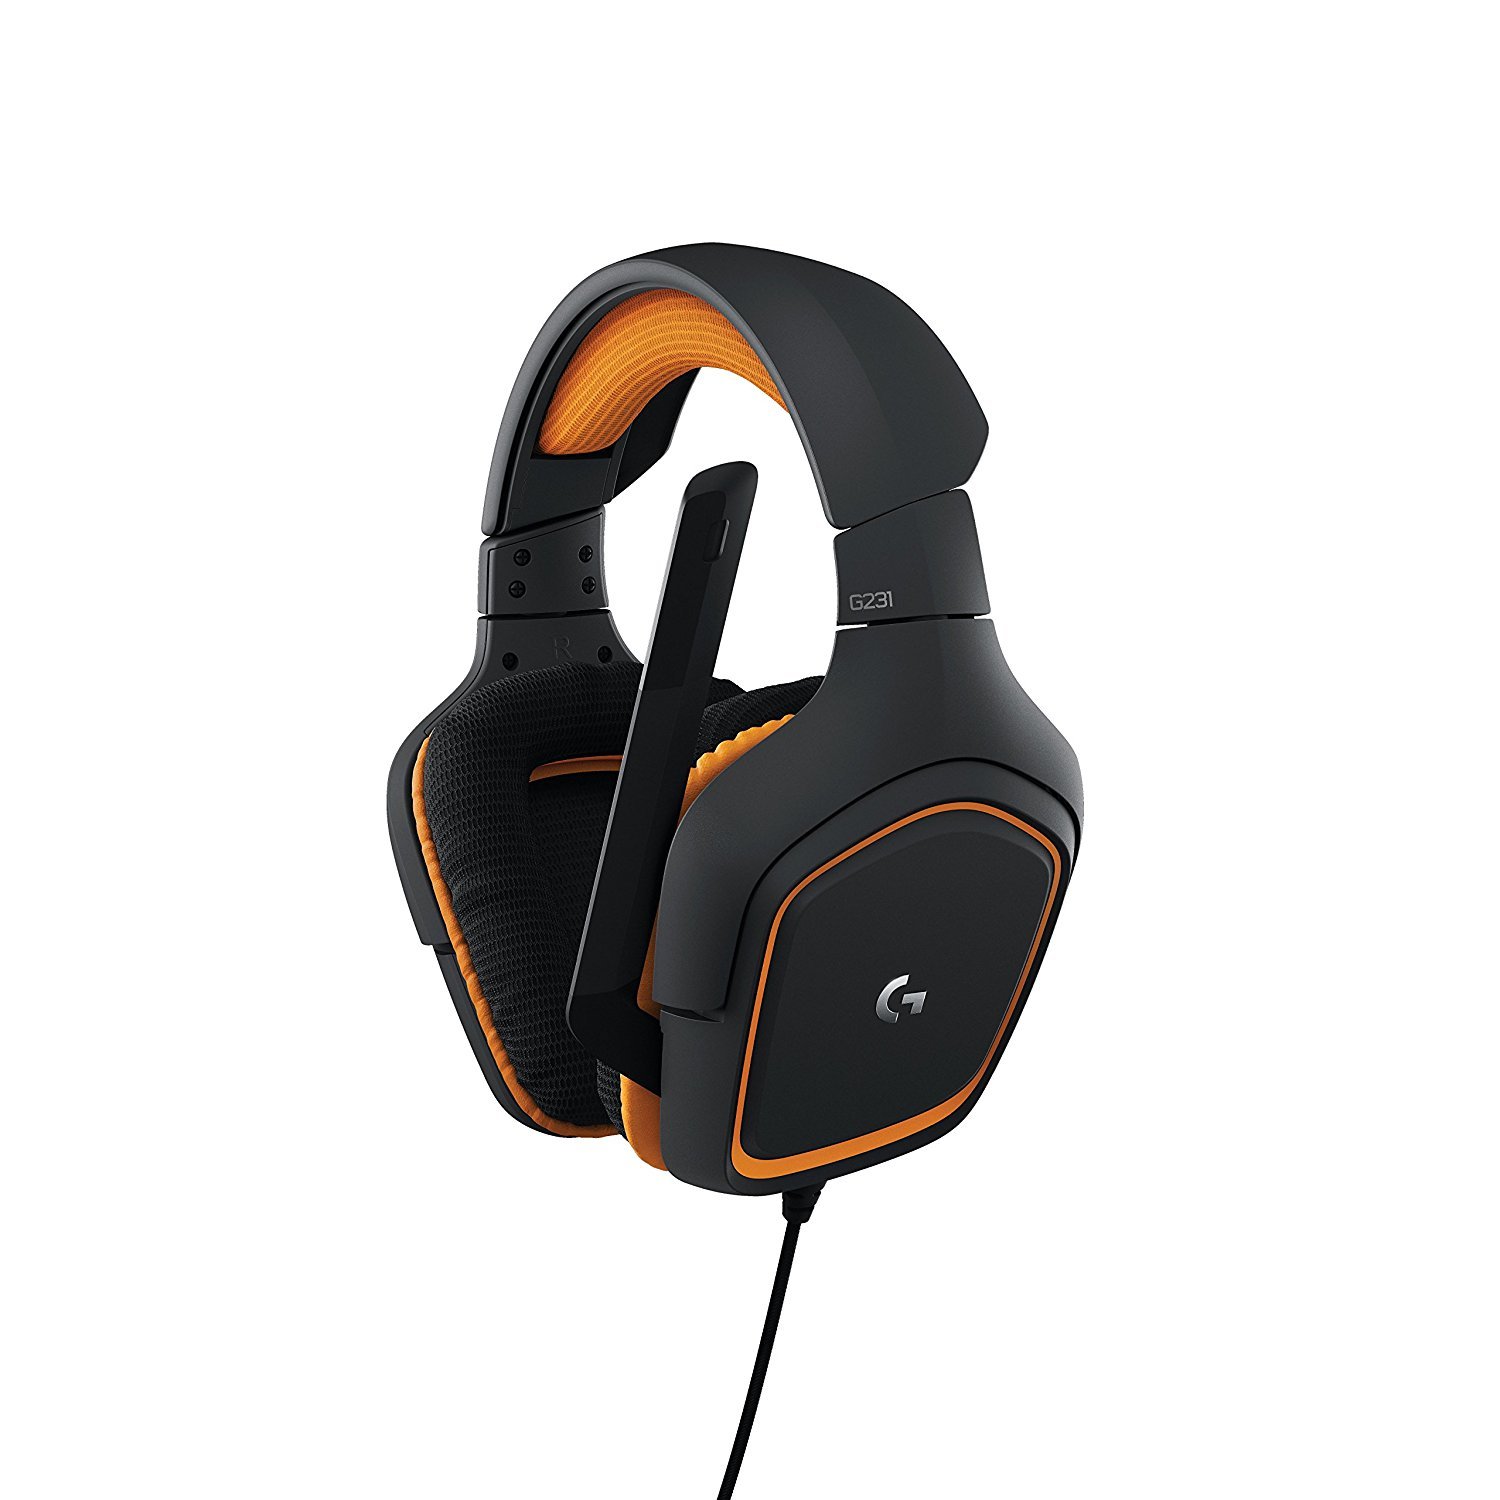 Logitech gaming headset with mic